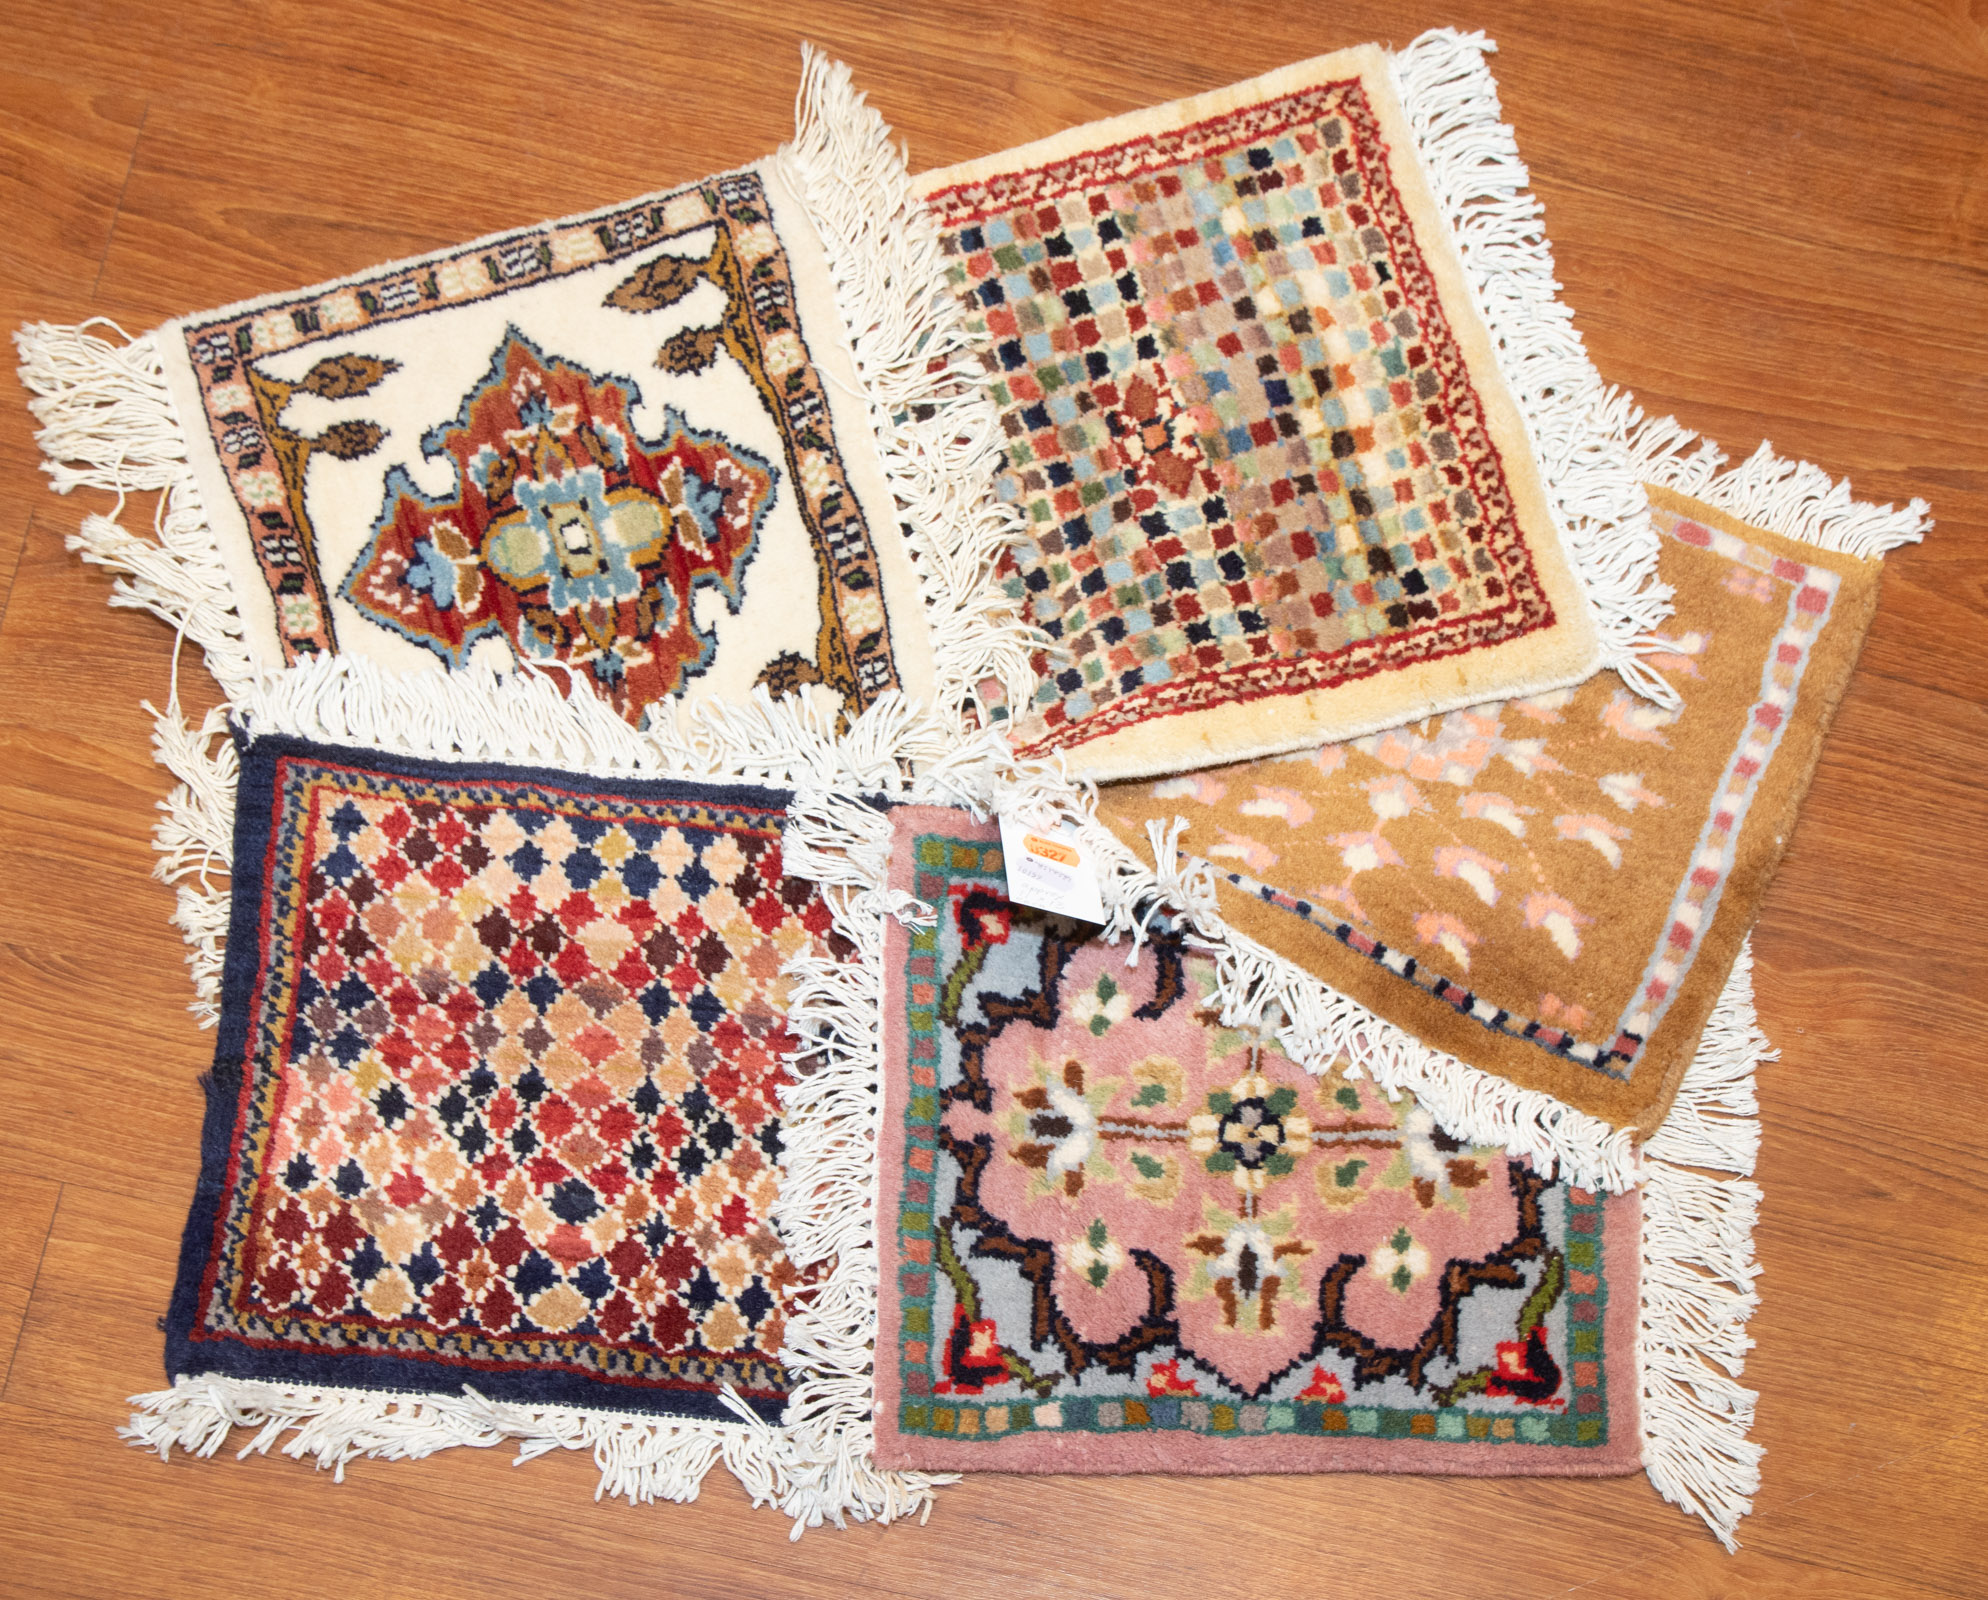 FIVE THROW RUGS, APPROX. 1 X 1